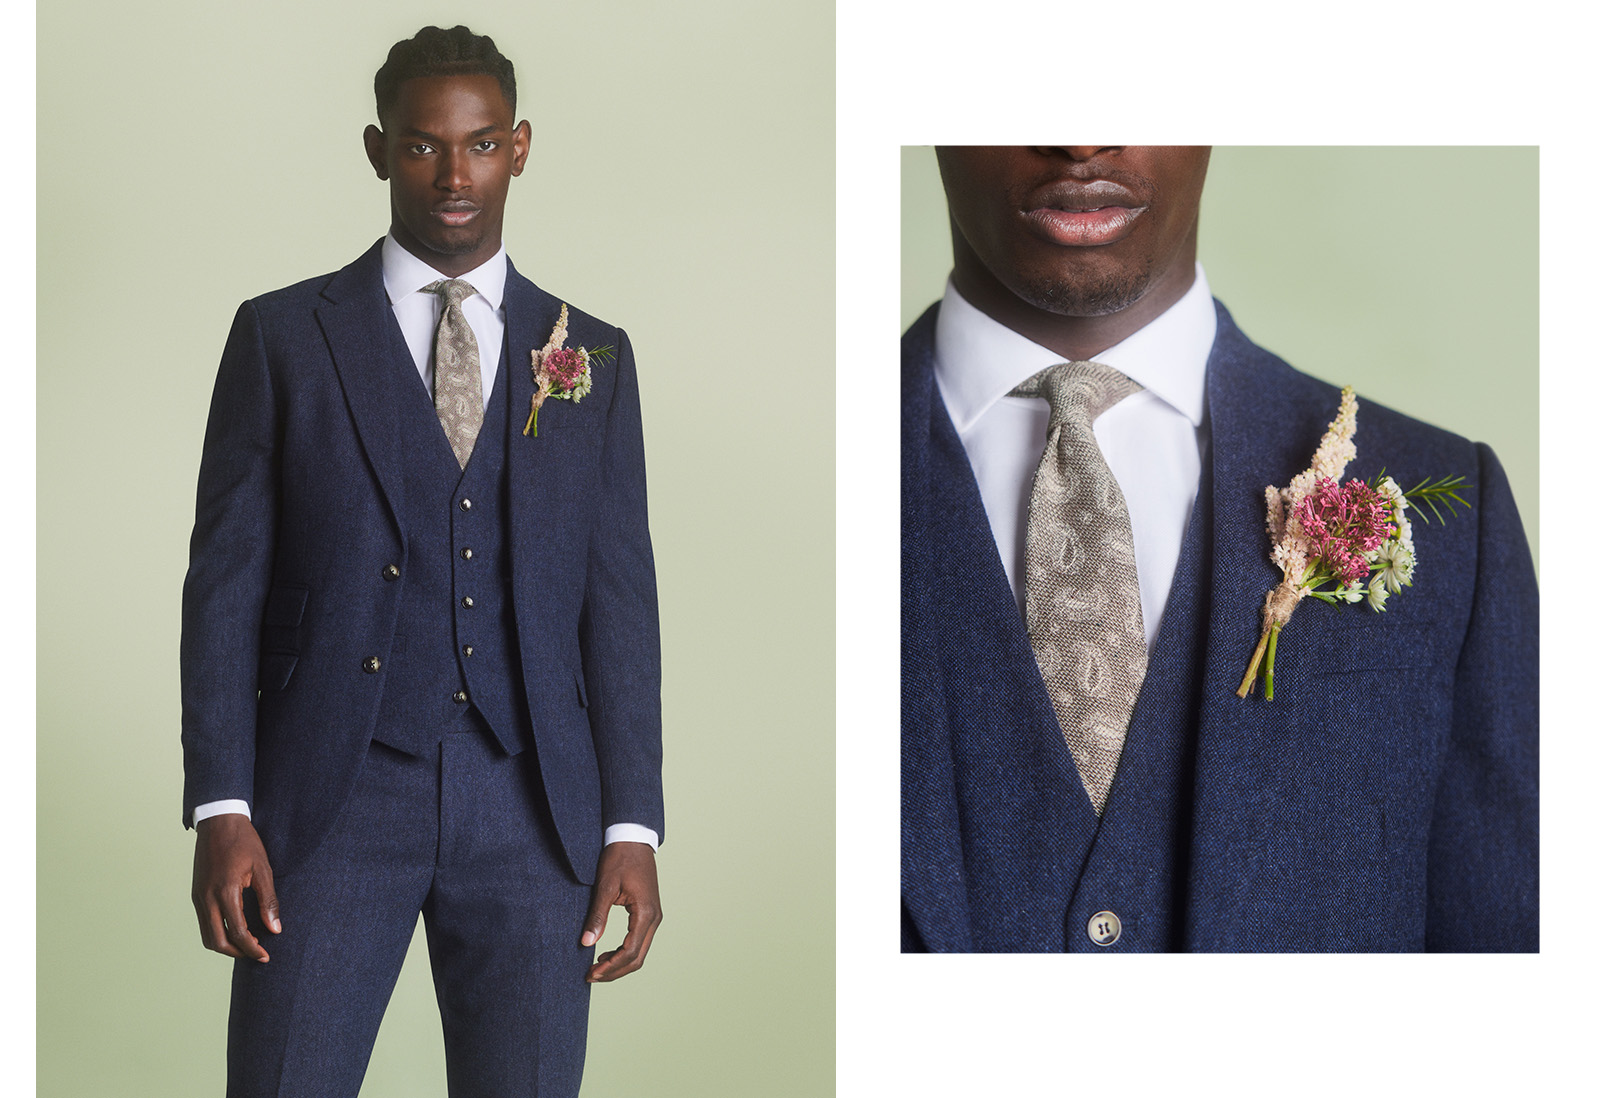 How to wear blue, navy and white to an autumn wedding